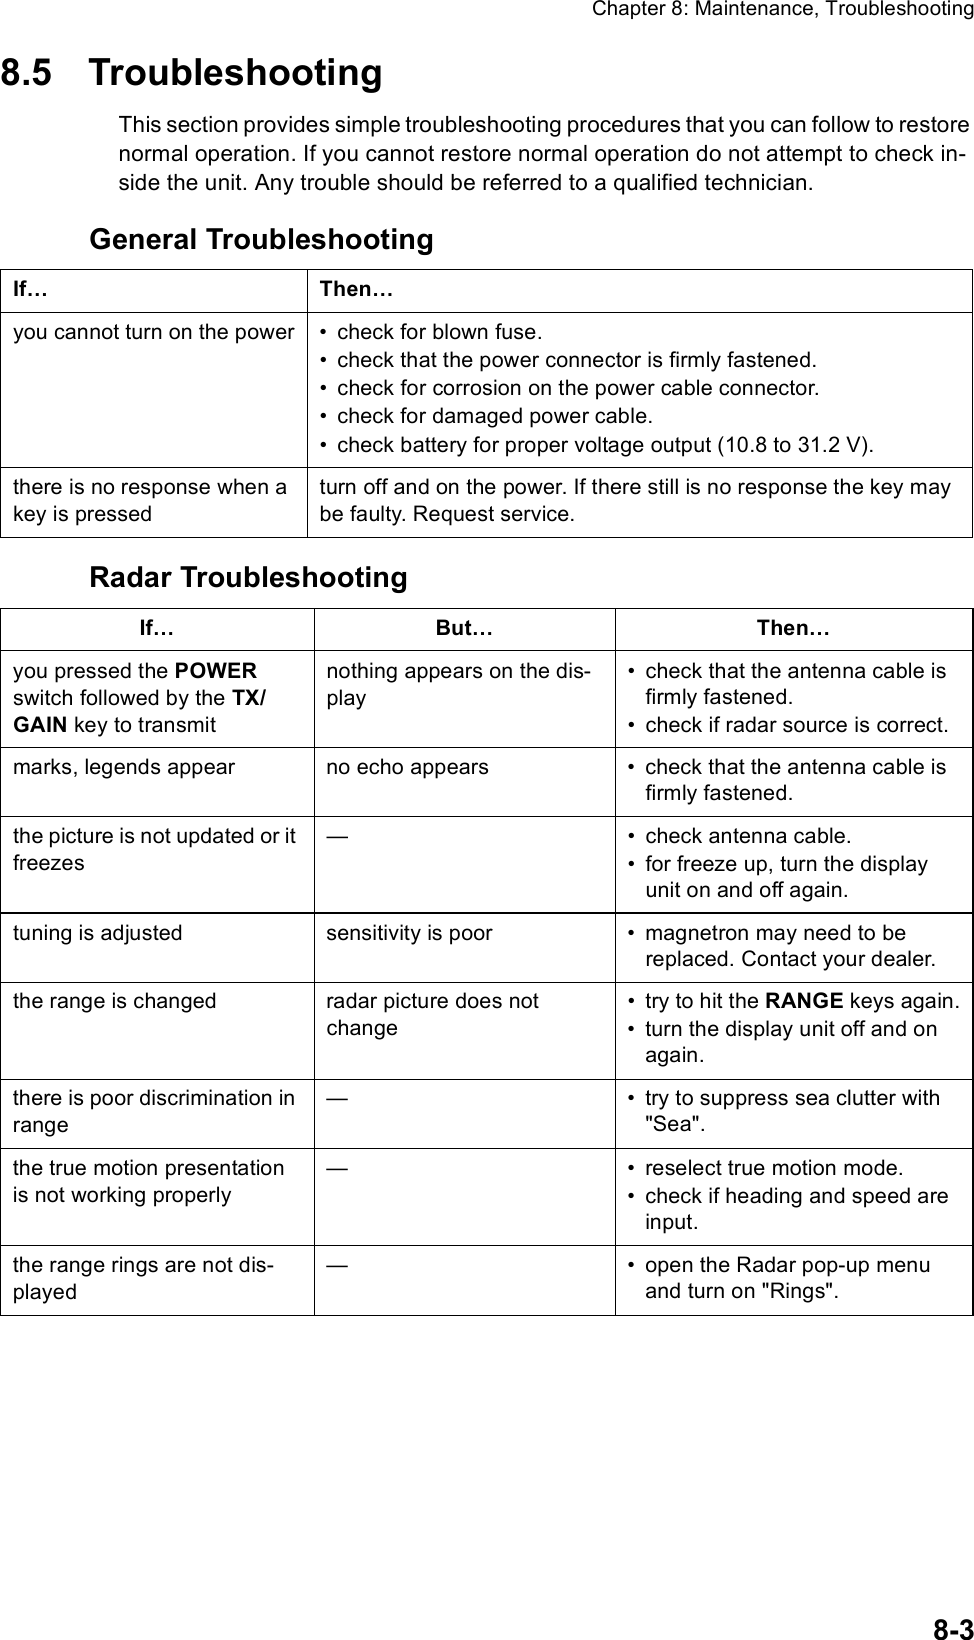 Chapter 8: Maintenance, Troubleshooting8-38.5 TroubleshootingThis section provides simple troubleshooting procedures that you can follow to restore normal operation. If you cannot restore normal operation do not attempt to check in-side the unit. Any trouble should be referred to a qualified technician.General TroubleshootingRadar TroubleshootingIf… Then…you cannot turn on the power • check for blown fuse.• check that the power connector is firmly fastened.• check for corrosion on the power cable connector.• check for damaged power cable.• check battery for proper voltage output (10.8 to 31.2 V).there is no response when a key is pressedturn off and on the power. If there still is no response the key may be faulty. Request service.If… But… Then…you pressed the POWER switch followed by the TX/GAIN key to transmit nothing appears on the dis-play• check that the antenna cable is firmly fastened.• check if radar source is correct.marks, legends appear  no echo appears • check that the antenna cable is firmly fastened.the picture is not updated or it freezes— • check antenna cable.• for freeze up, turn the display unit on and off again.tuning is adjusted sensitivity is poor • magnetron may need to be replaced. Contact your dealer.the range is changed radar picture does not change• try to hit the RANGE keys again.• turn the display unit off and on again.there is poor discrimination in range— • try to suppress sea clutter with &quot;Sea&quot;.the true motion presentation is not working properly— • reselect true motion mode.• check if heading and speed are input.the range rings are not dis-played— • open the Radar pop-up menu and turn on &quot;Rings&quot;.